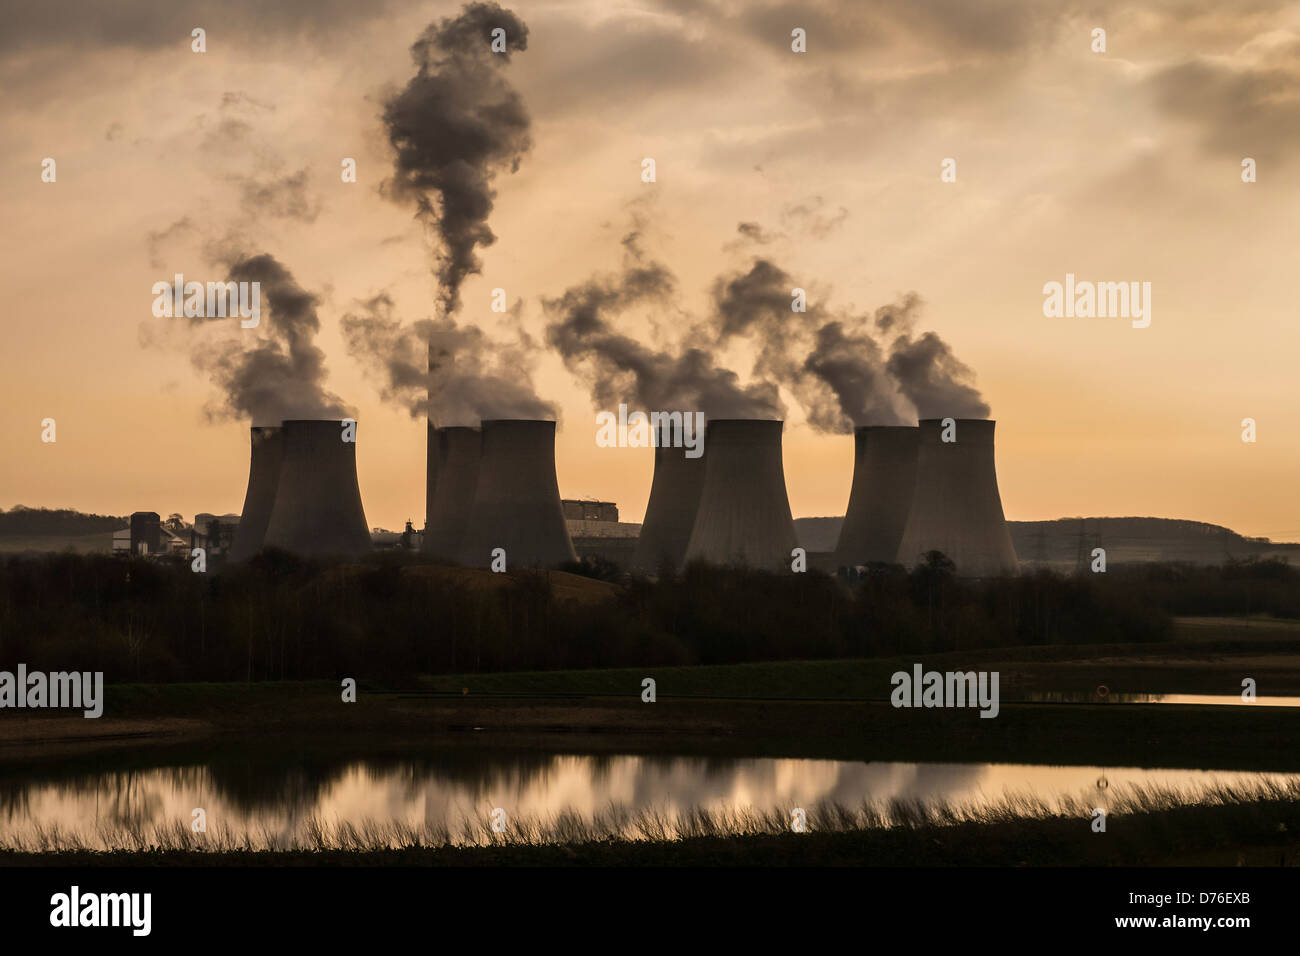 RATCLIFFE-ON-SOAR, NOTTINGHAMSHIRE, UK - APRIL 21, 2013:  View of the Power Station in early morning light with water vapour Stock Photo